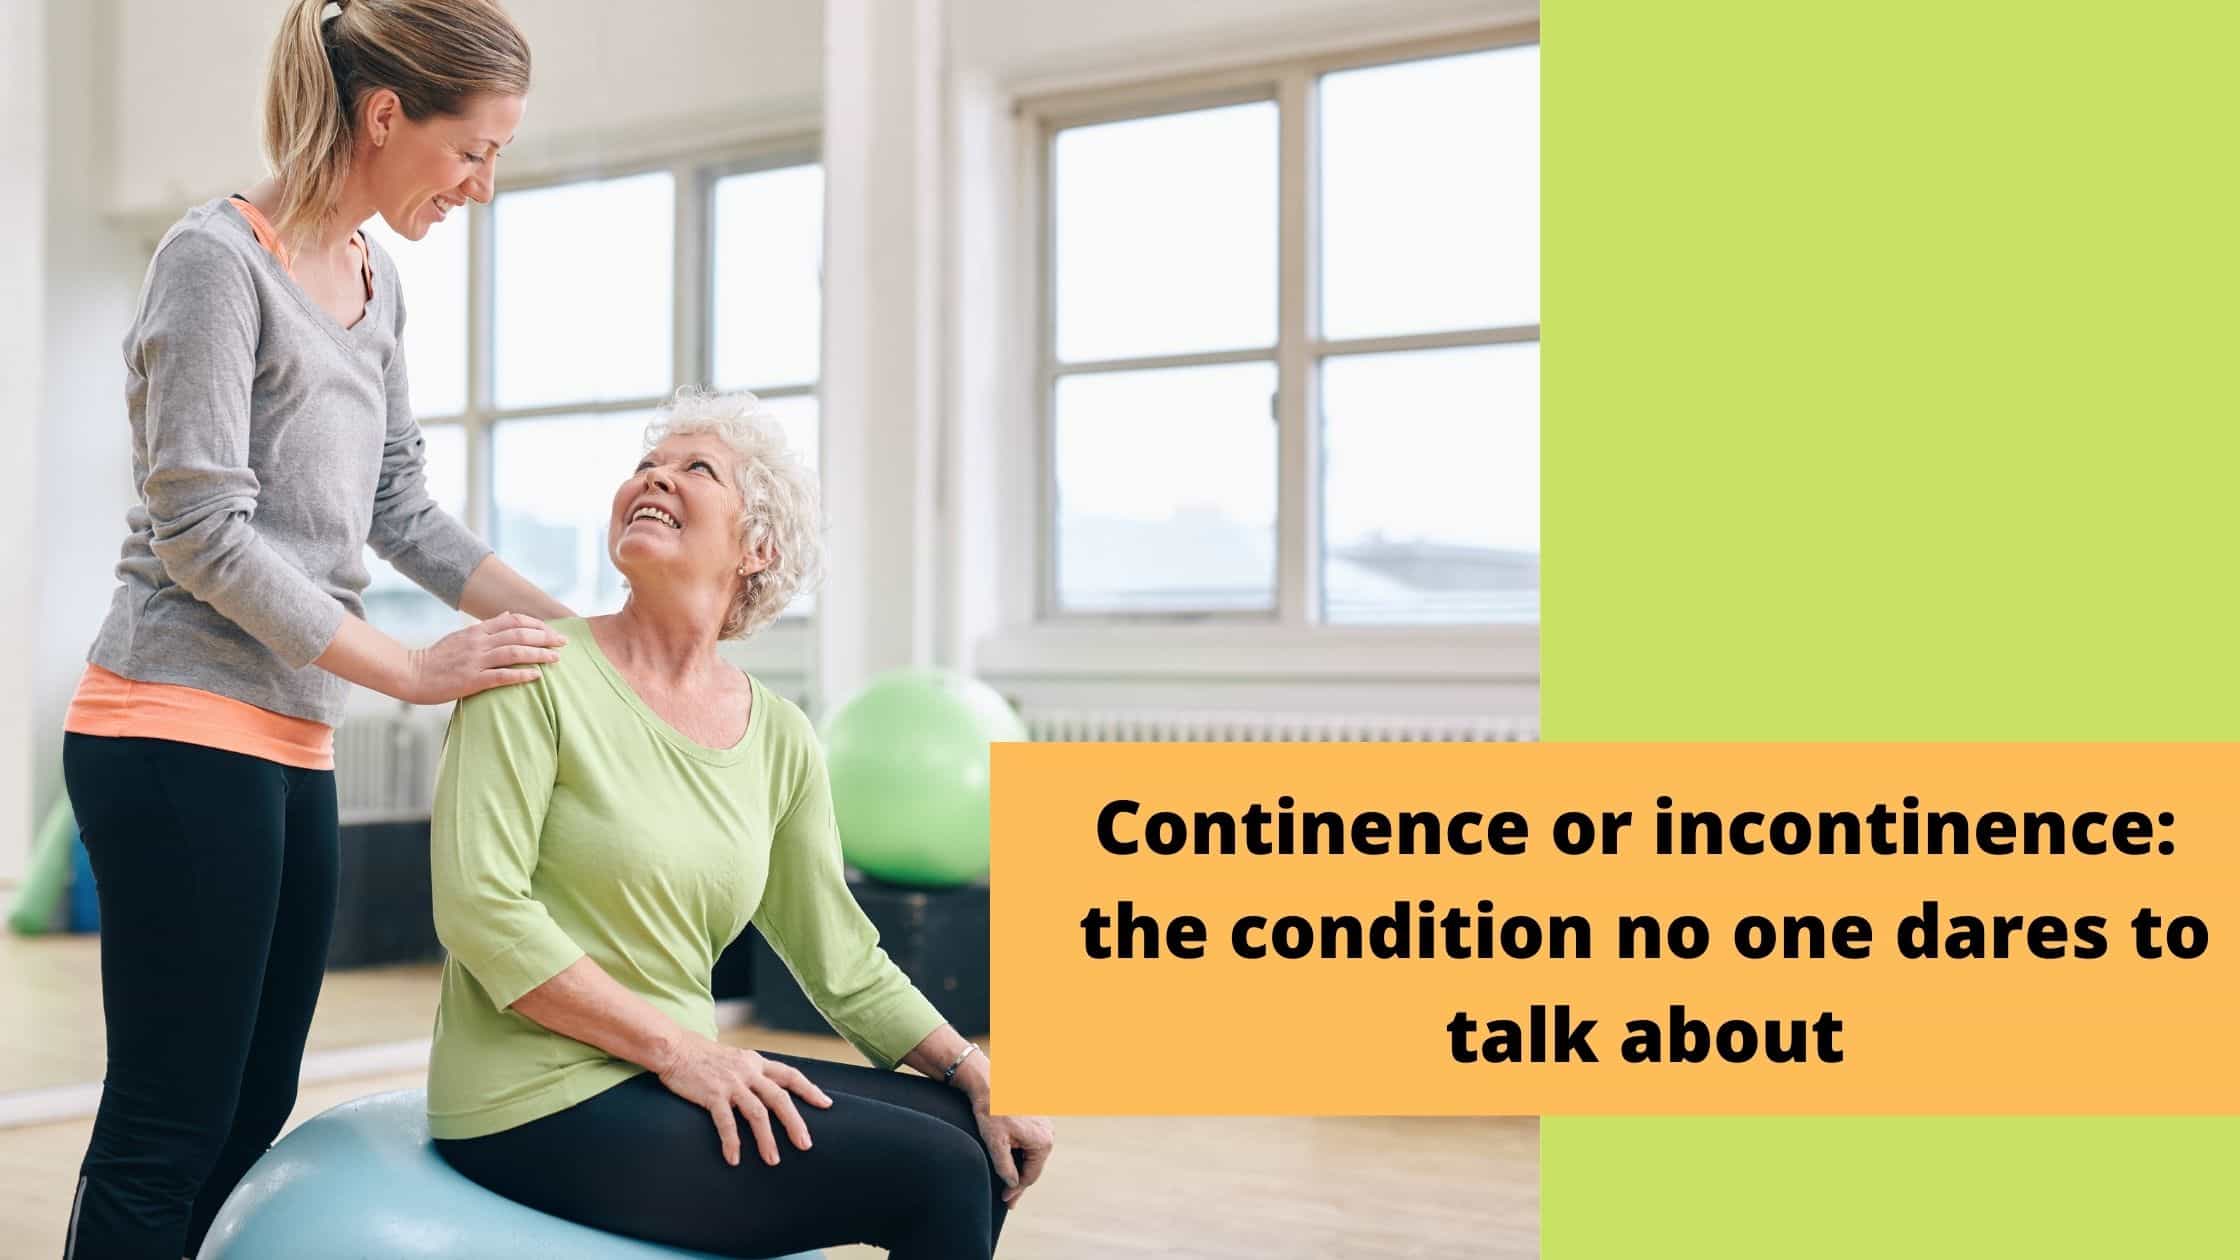 Continence or incontinence: the condition no one dares to talk about